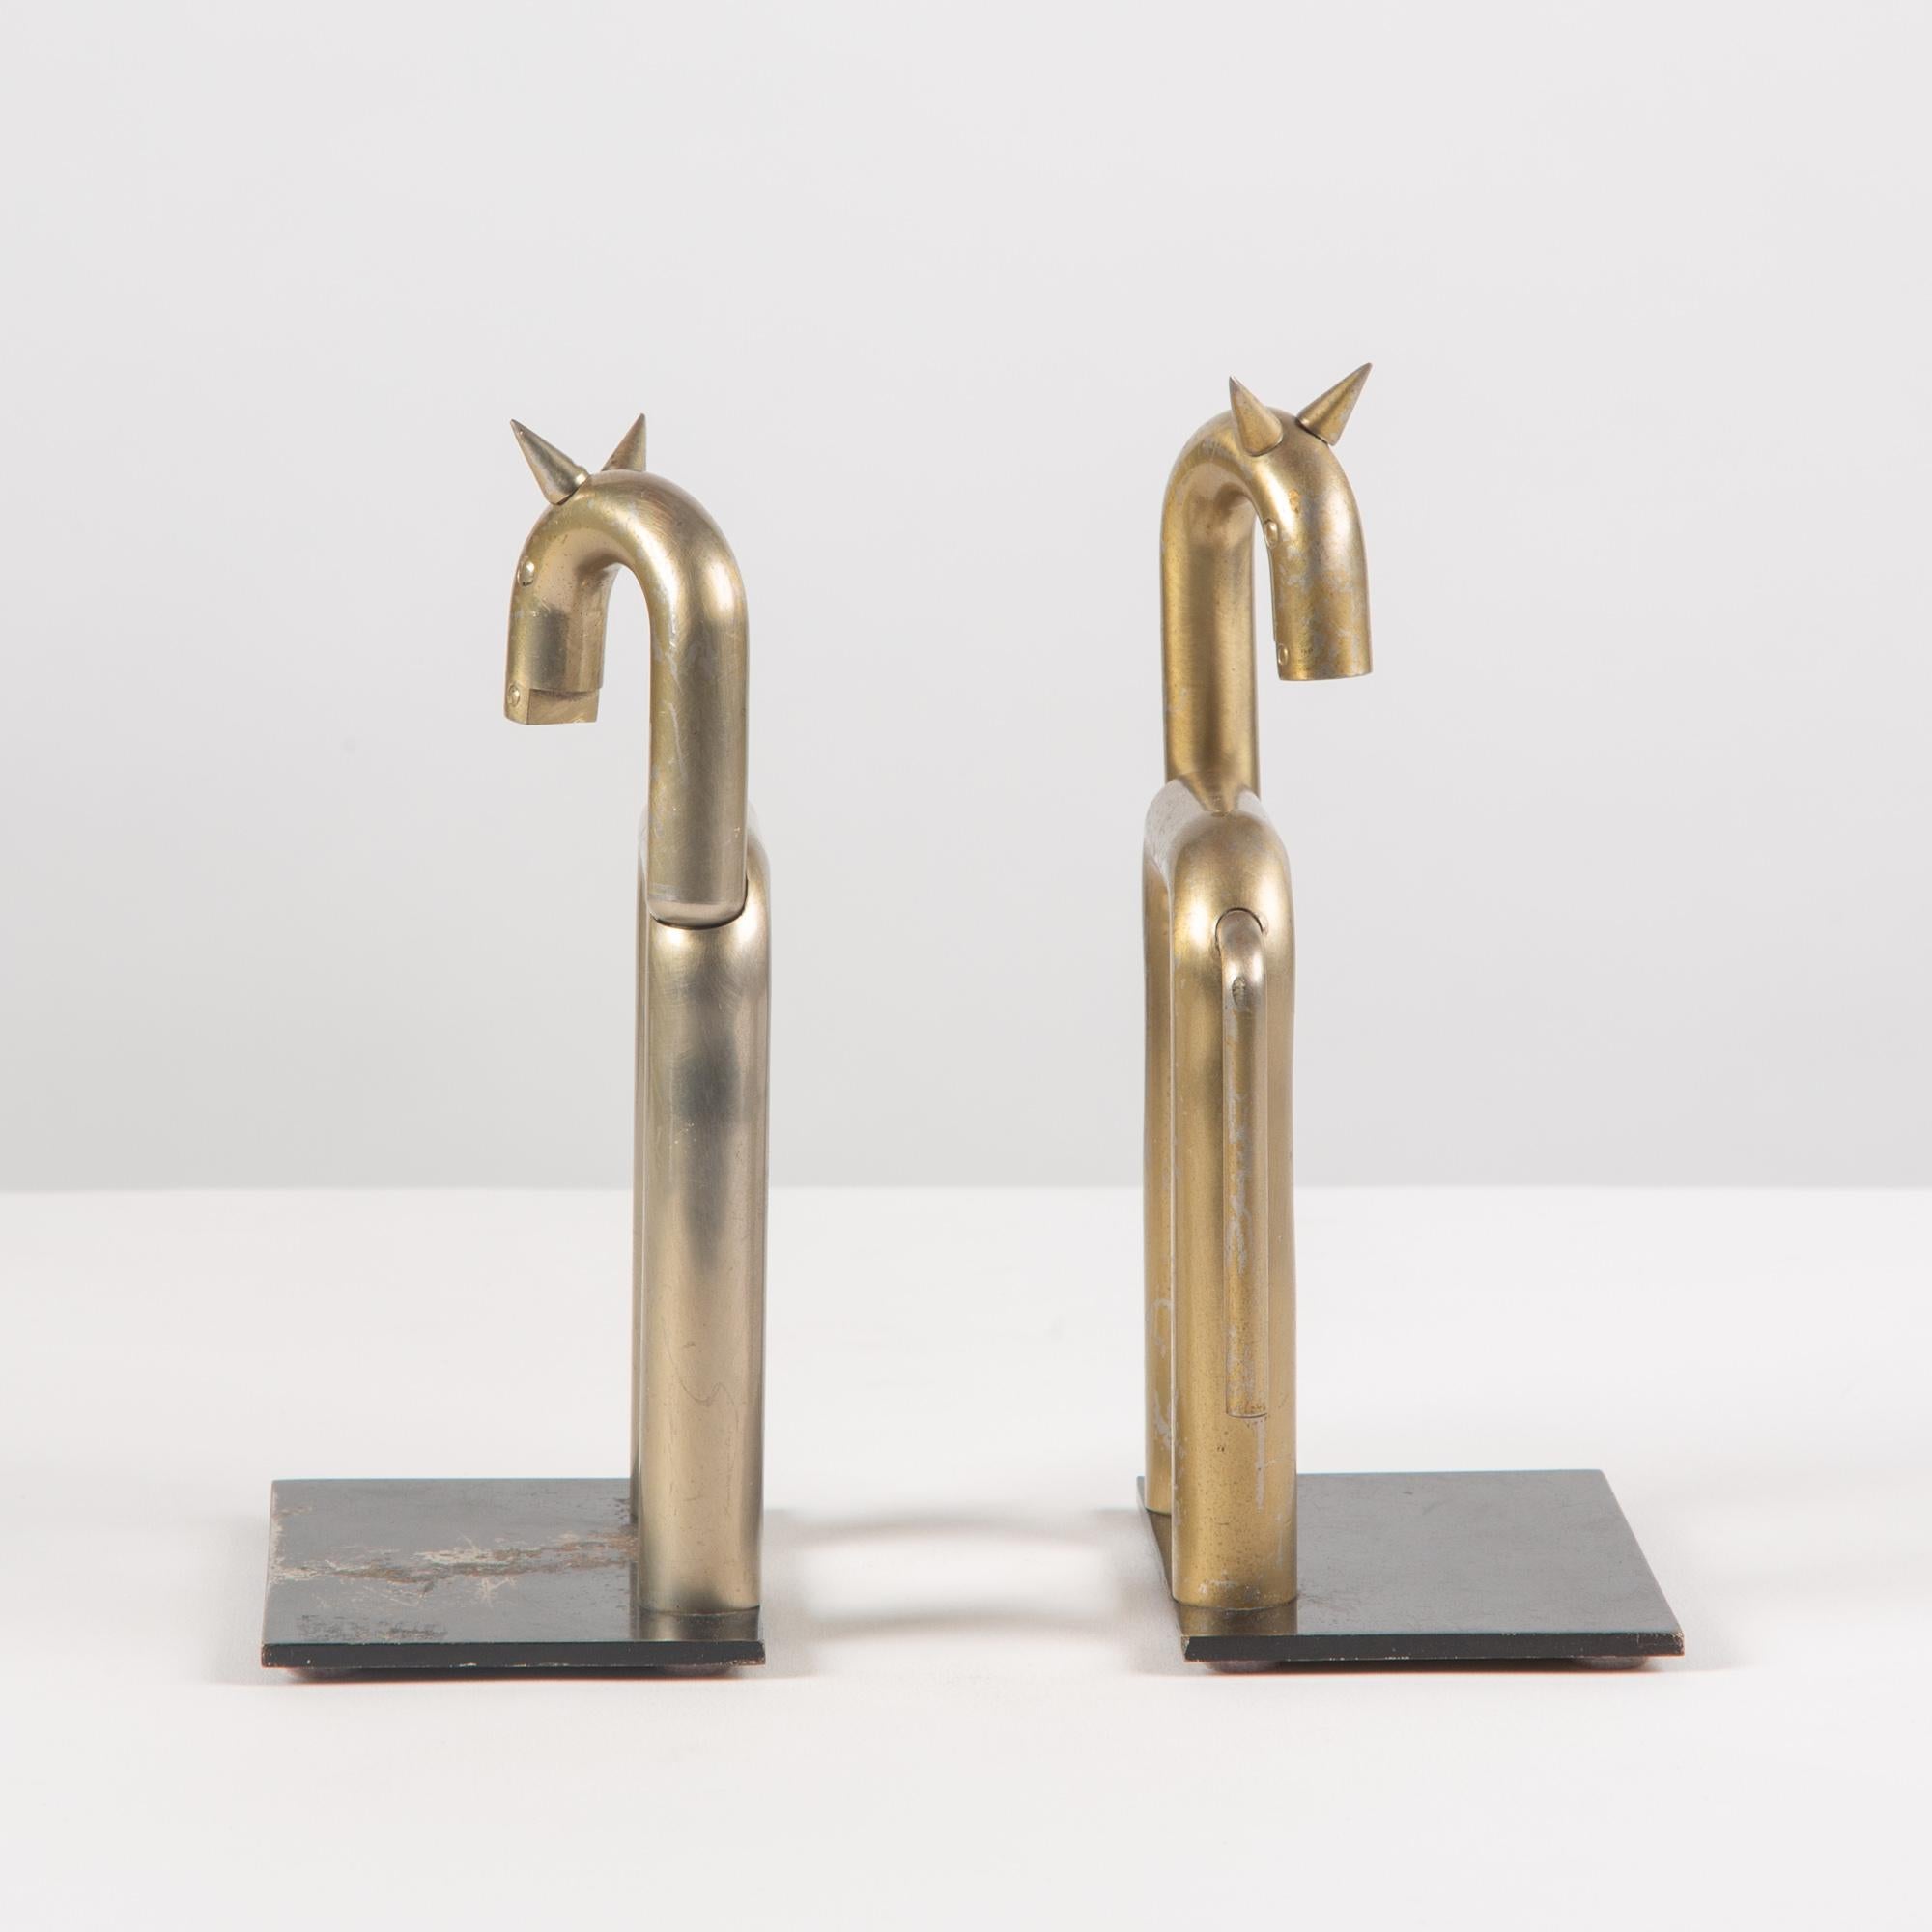 Pair of patinated stainless steel bookends by Walter von Nessen for Chase, c.1930s, USA. The pair of bookends feature a black painted metal base with geometric horse figures in a golden hue. This playful pair will liven any bookshelf.

The chase